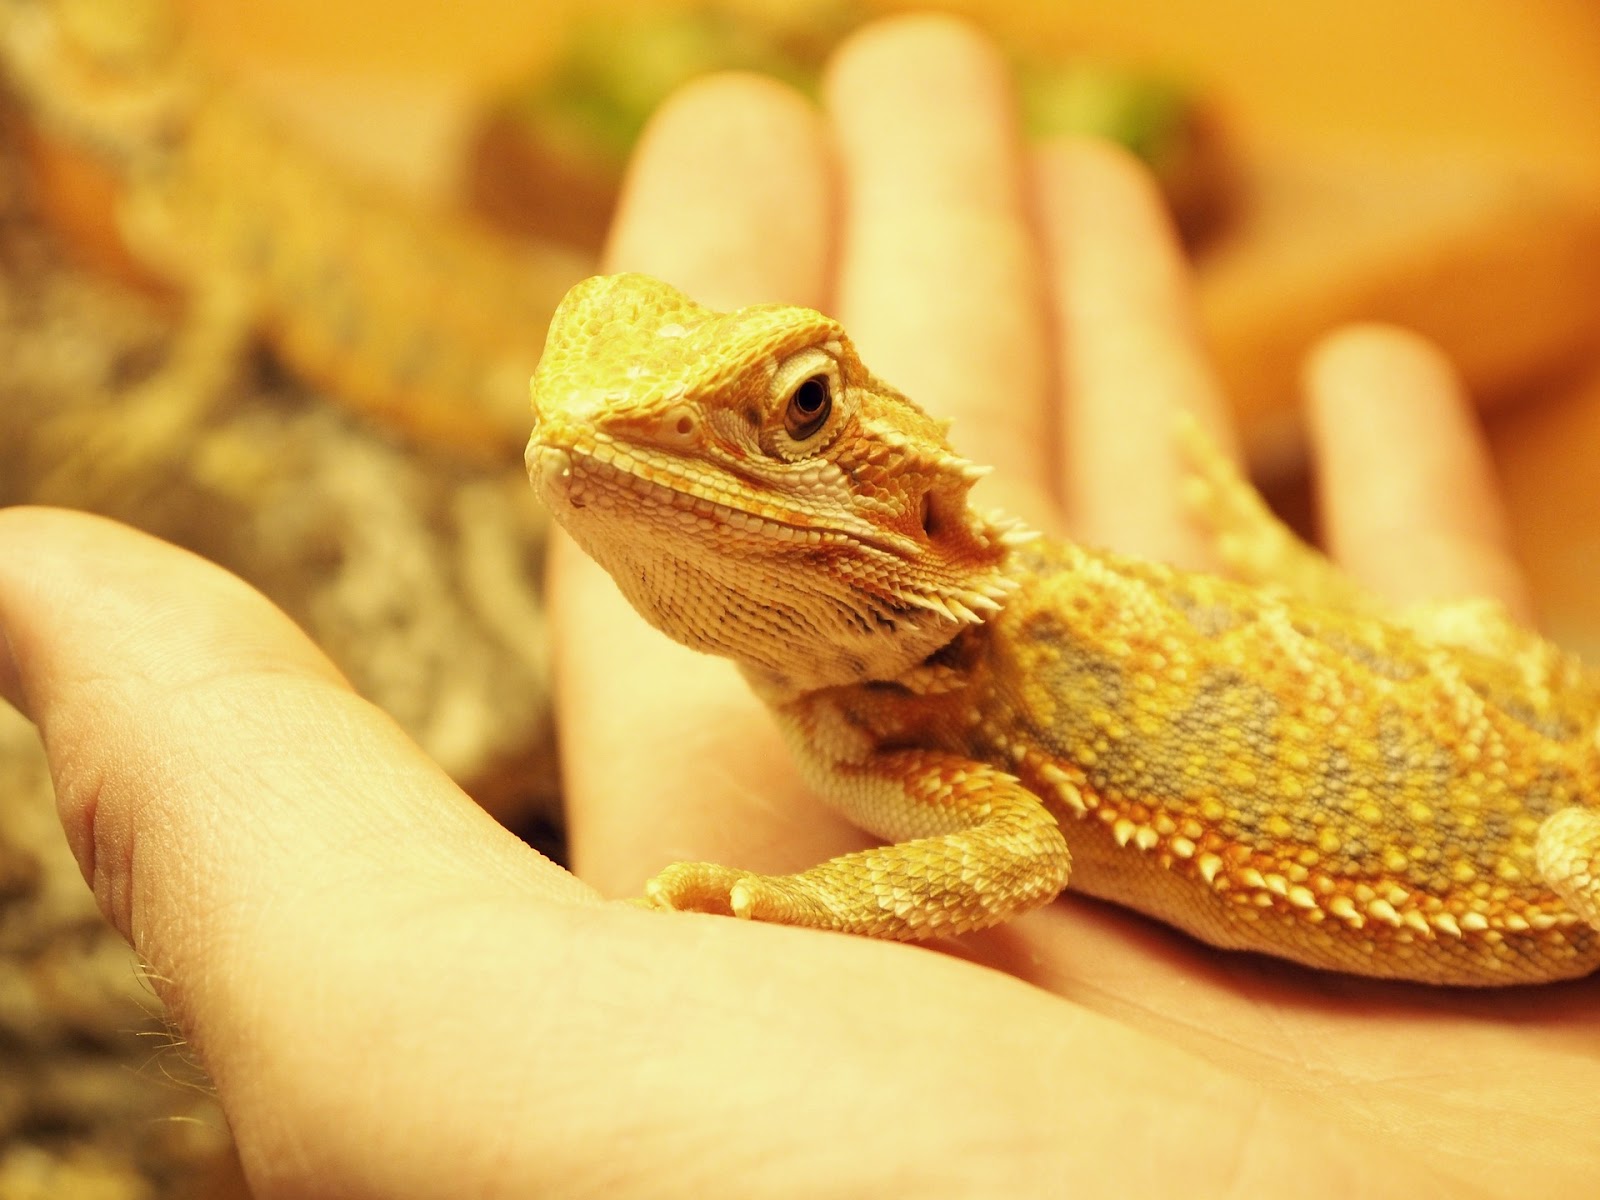 Bearded dragon in owner's palm